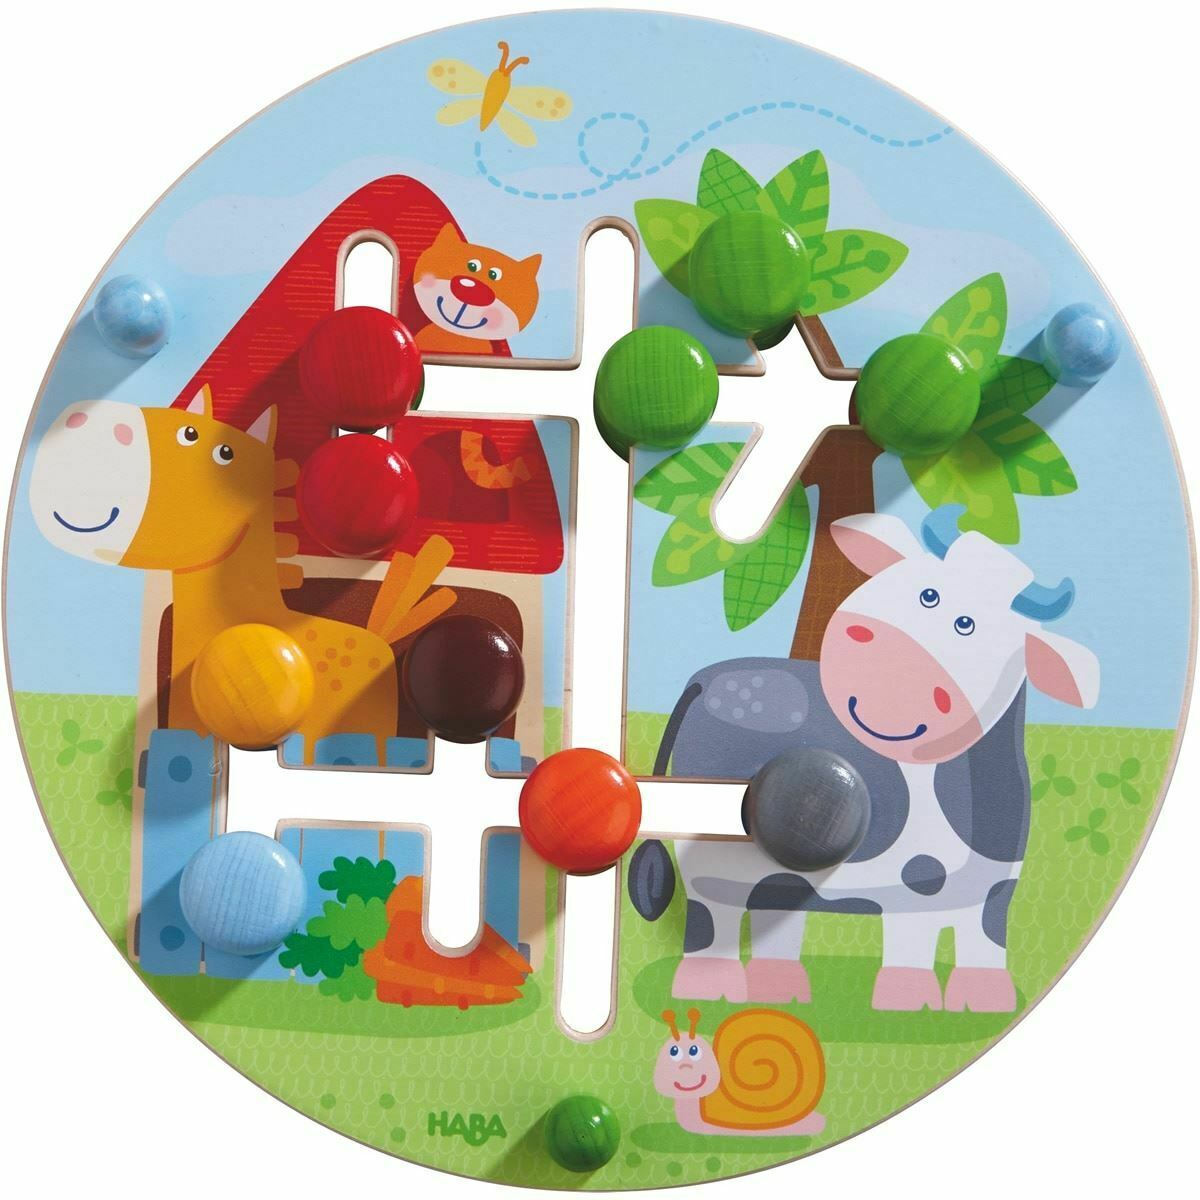 HABA Motor Skills Board On the Farm - Double Sided Wooden Color and Shape Recognition Fun Ages 1 +